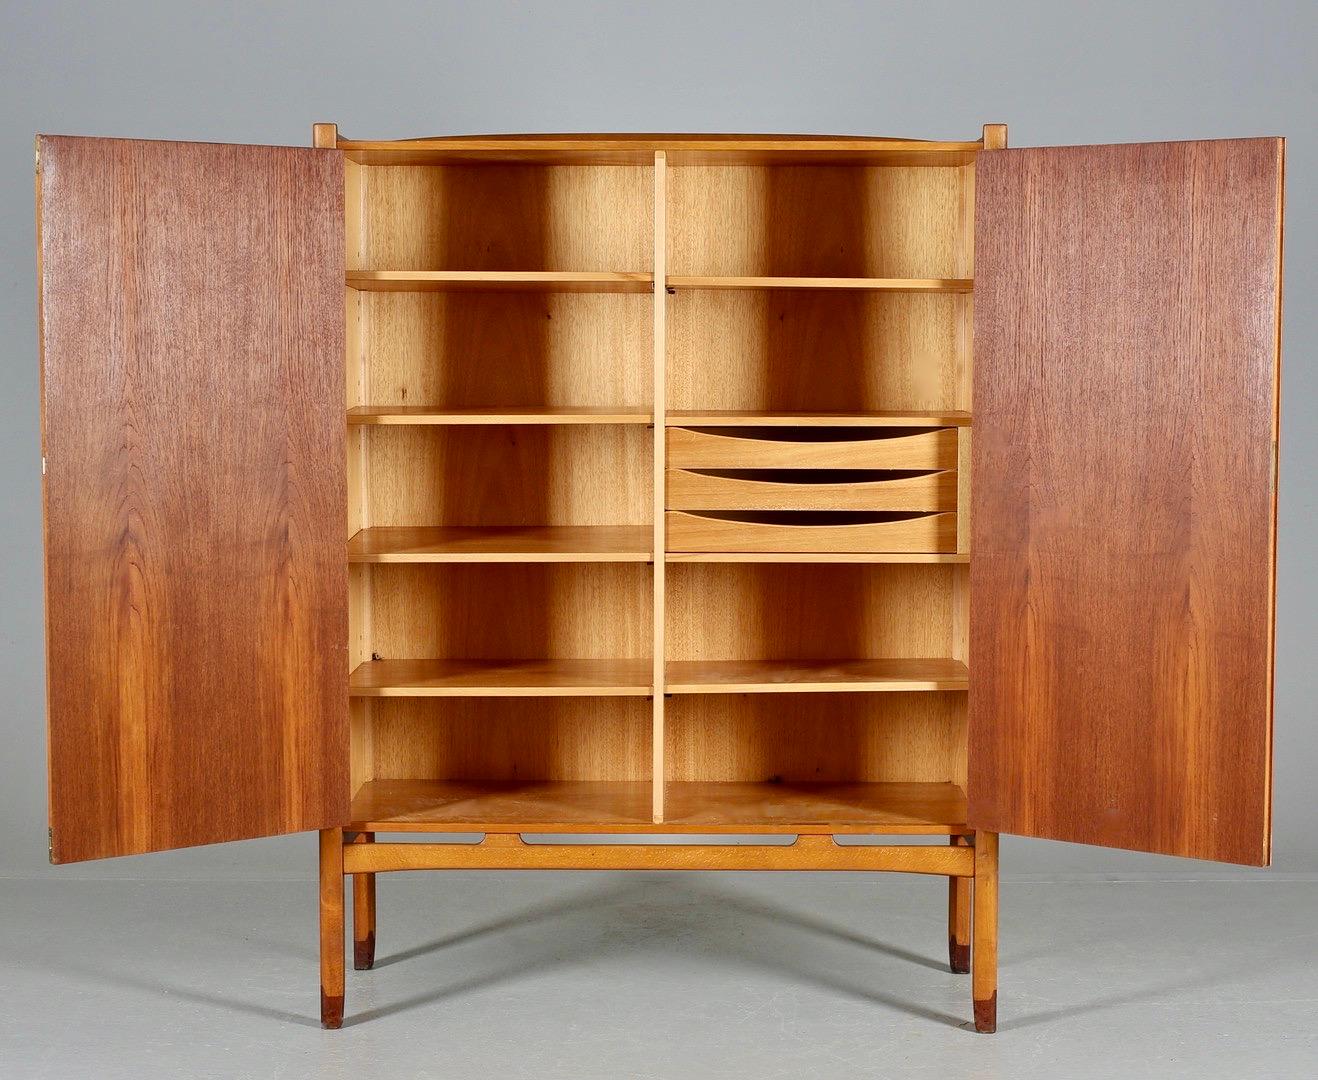 Beautiful relief carved teak 'Bangkok' cabinet on a contrasting solid beech base. Designed by Yngve Ekström for Westbergs Möbler, Sweden.
The detailed designed cabinet has a beautiful interior with adjustable shelves and a compartment with drawers.